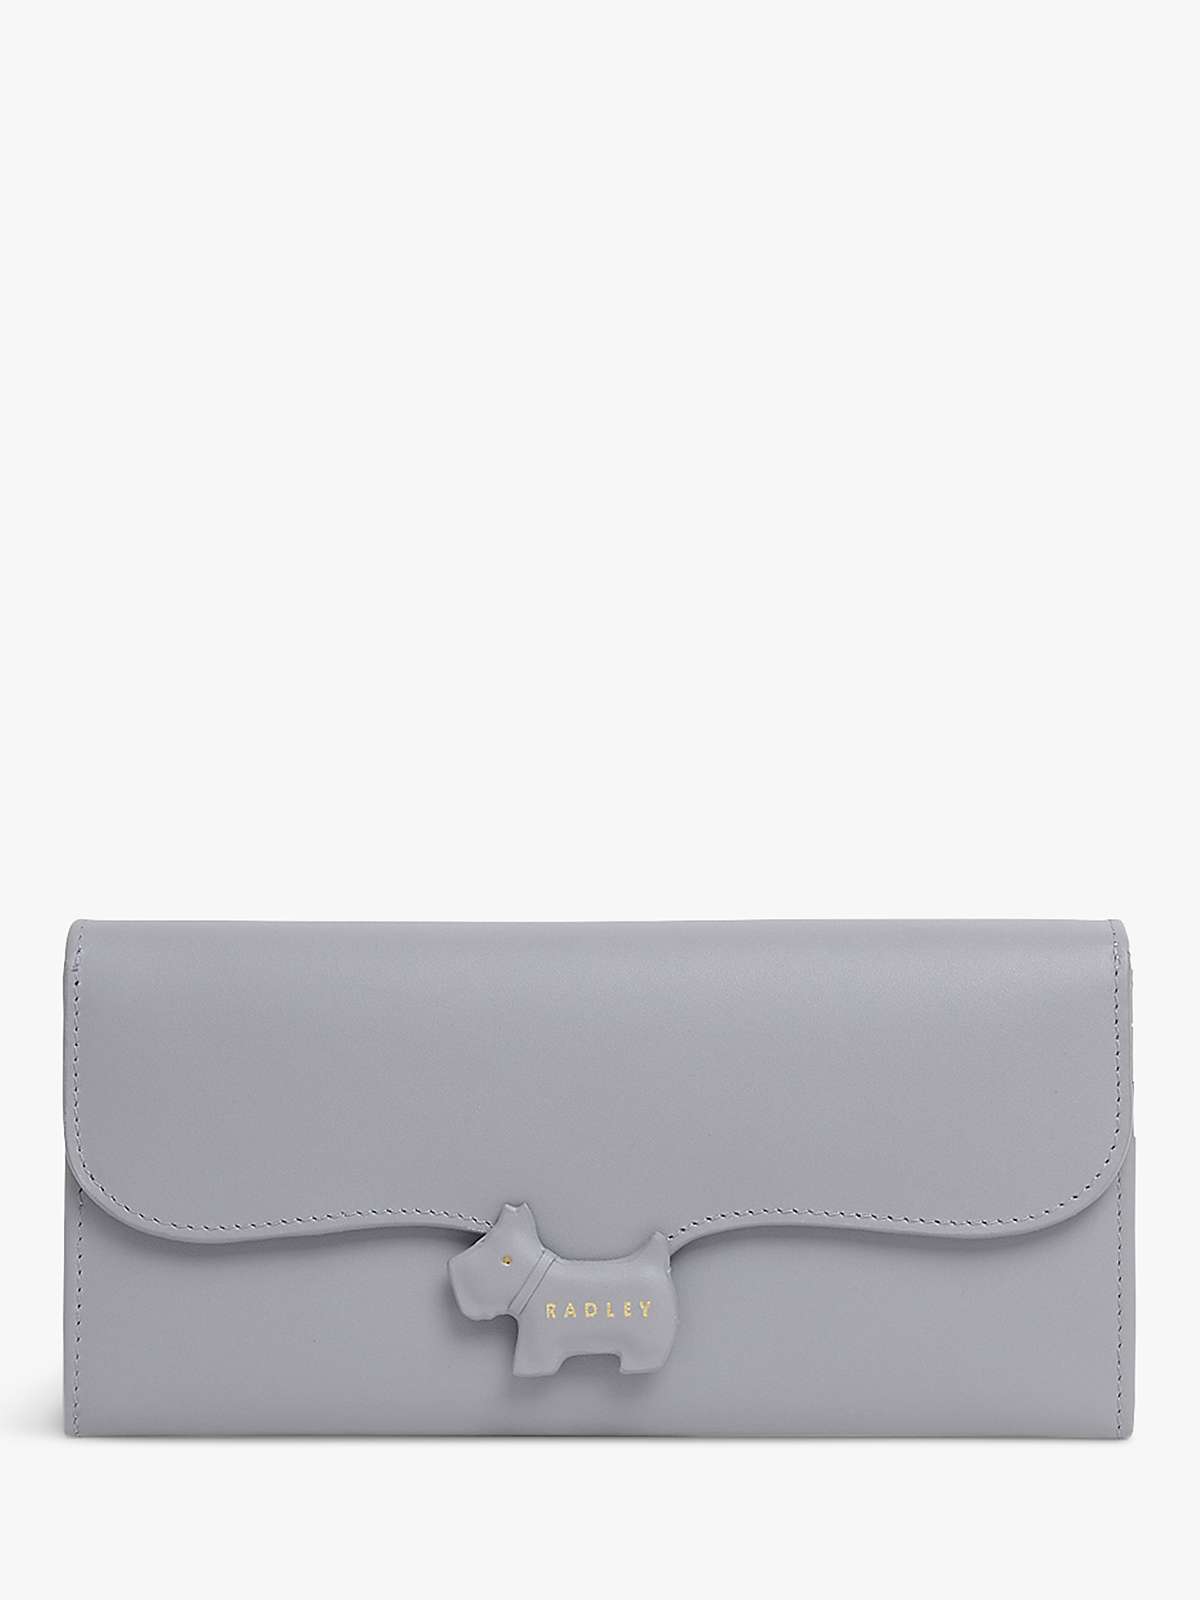 Buy Radley Crest Leather Large Flap Over Matinee Purse Online at johnlewis.com